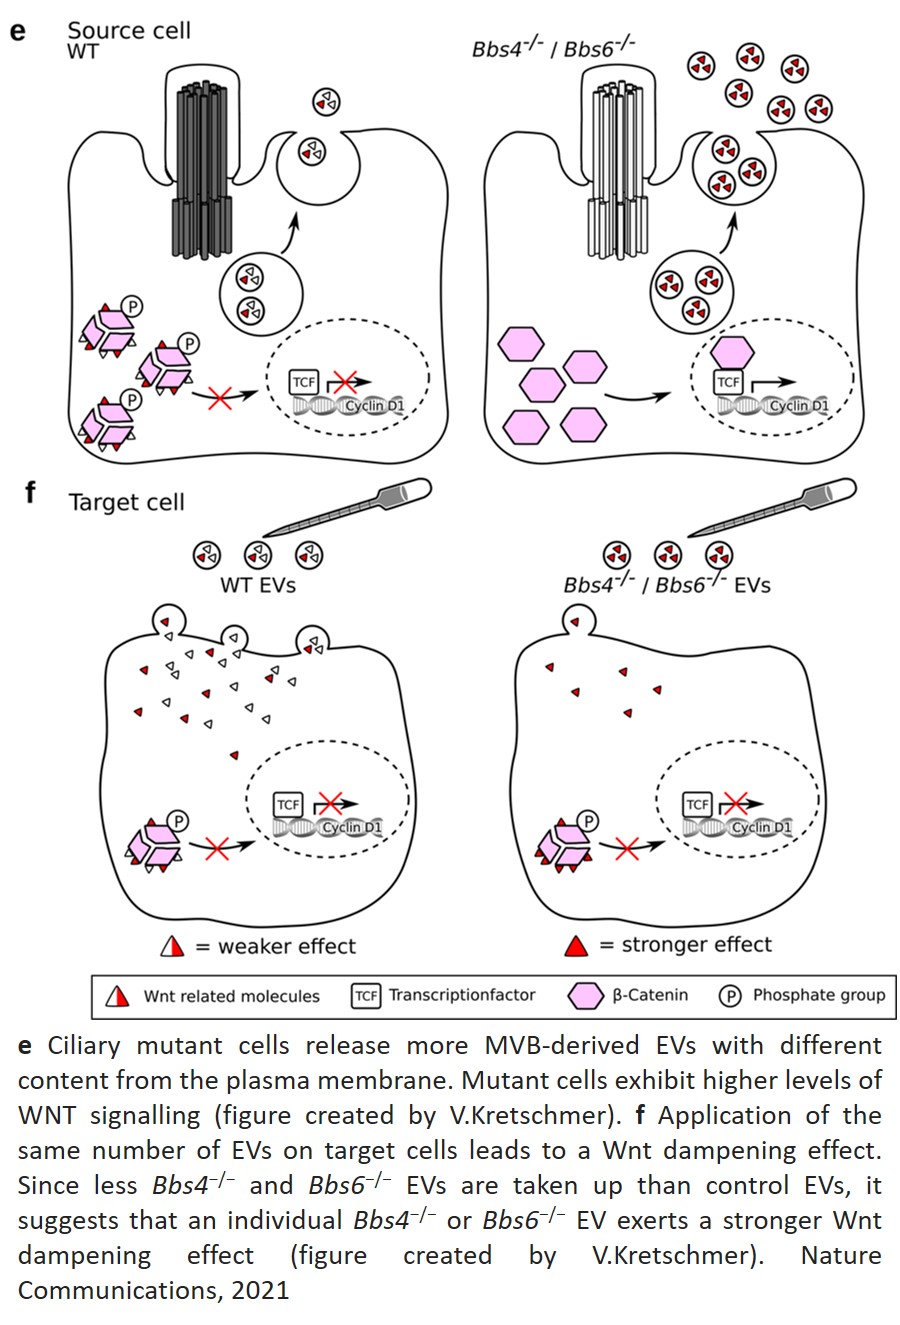 Modified extracellular vesicle signaling in ciliopathies